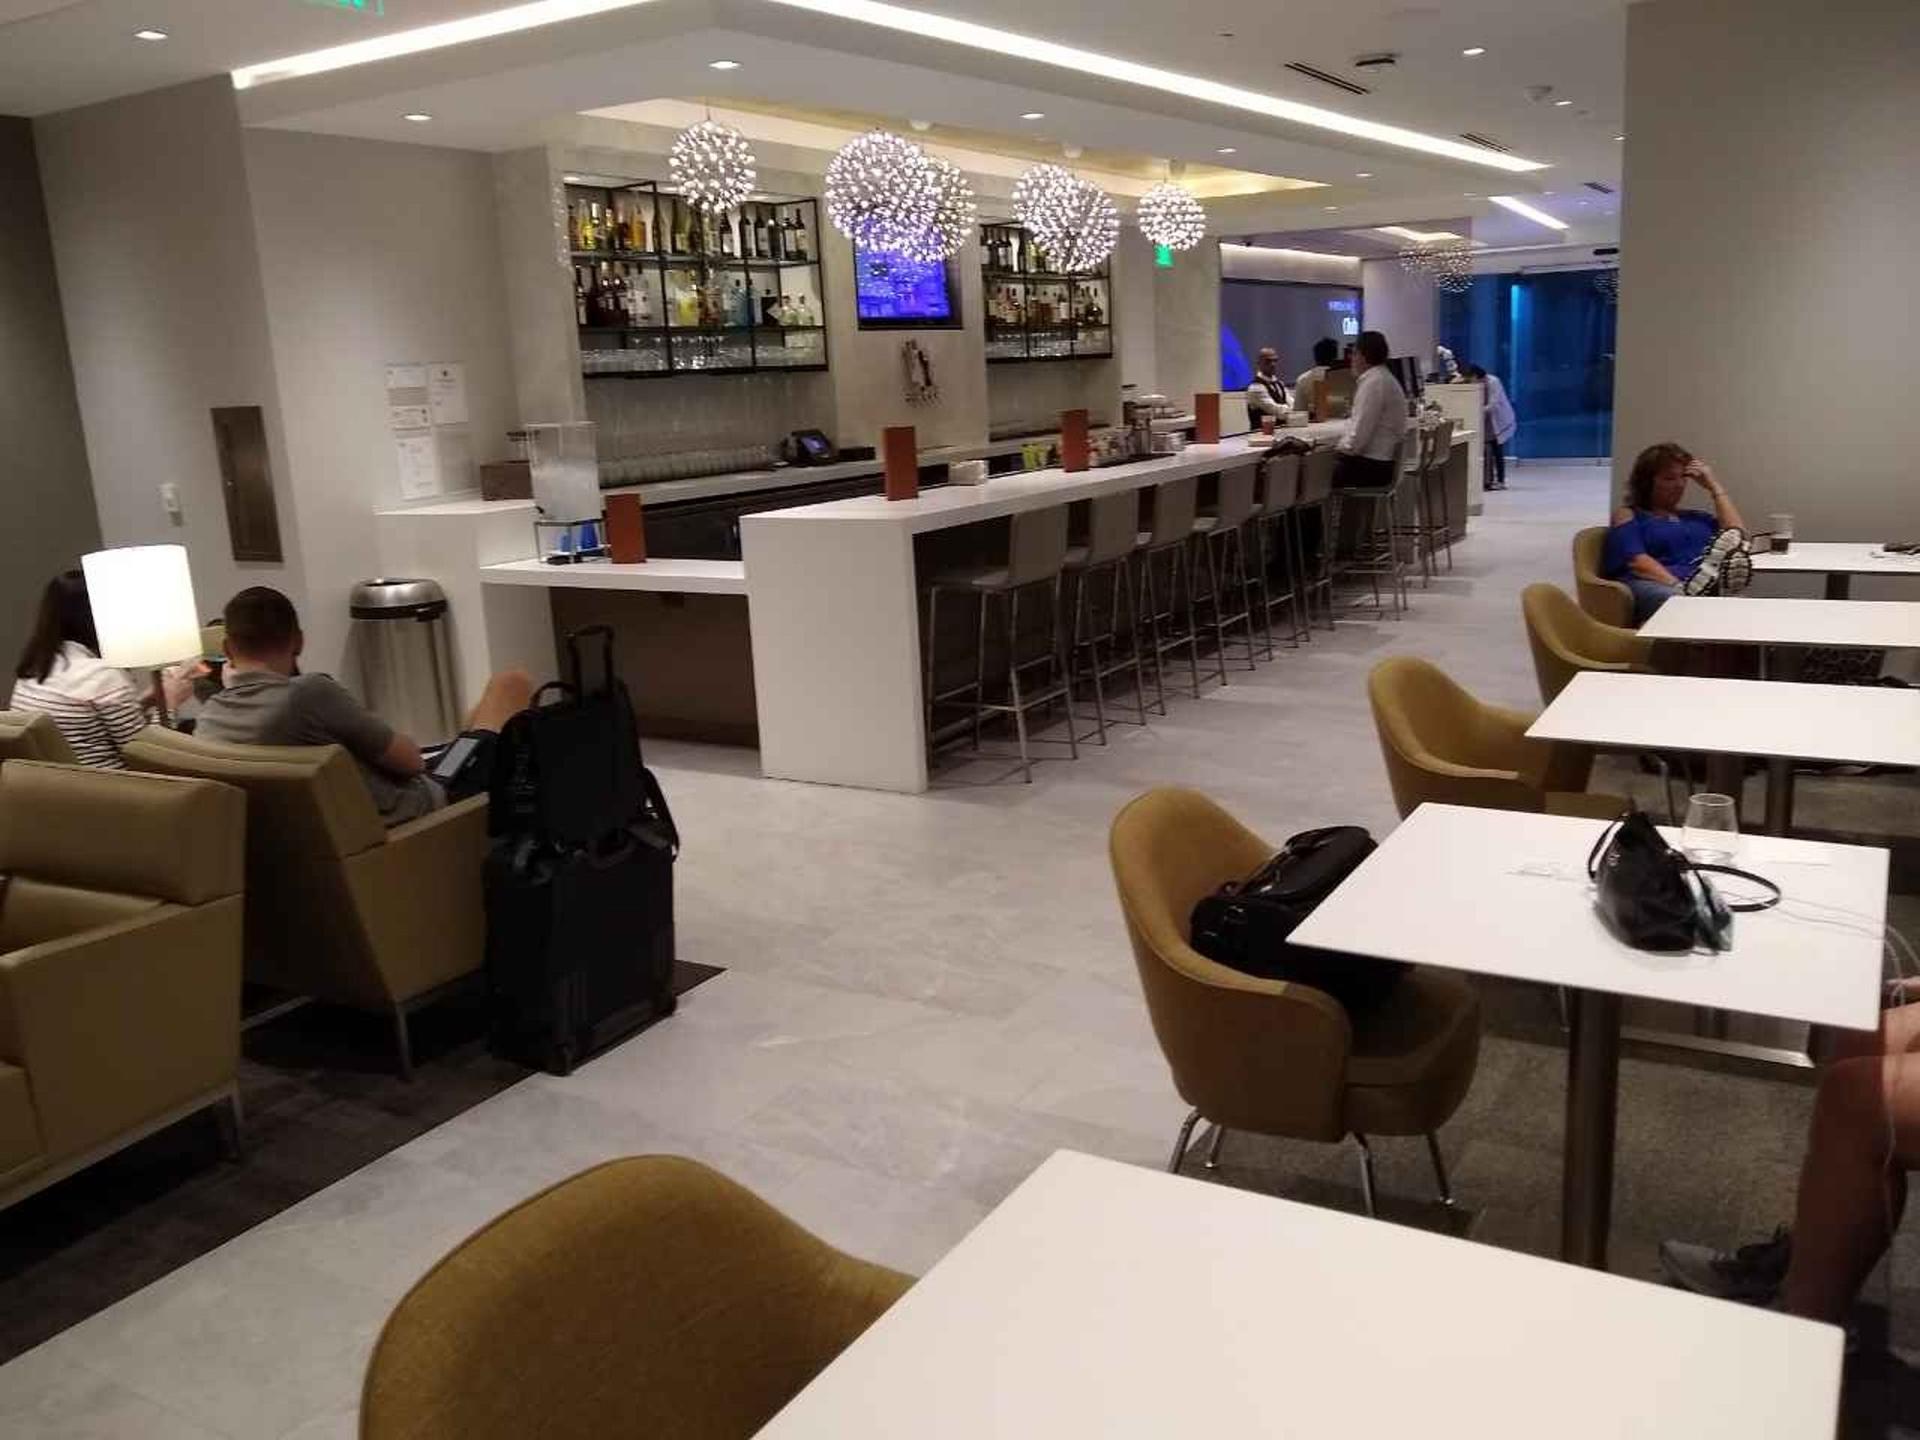 United Airlines United Club image 2 of 2